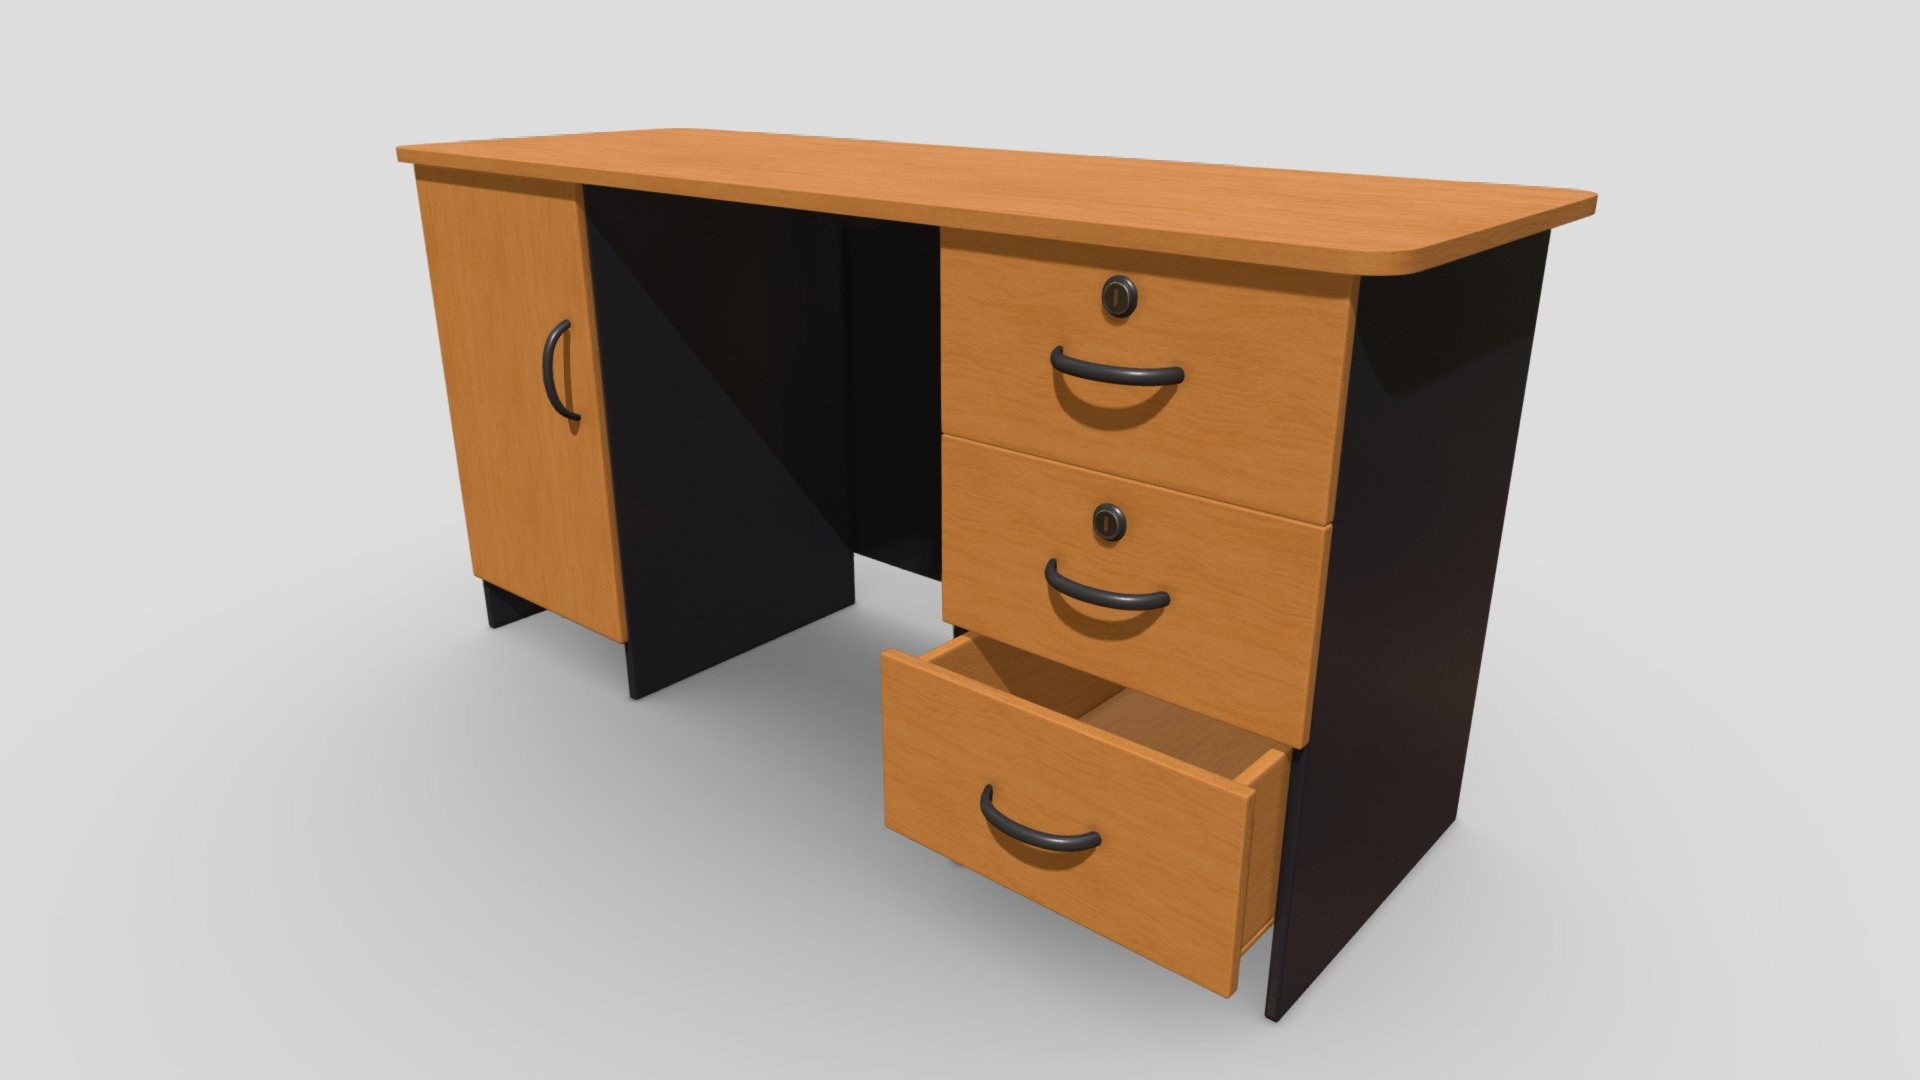 Free model,Wooden Office Table Desk 

to download blender file visit :
https://www.patreon.com/posts/free-model-table-74381569

Support me to add more free content :
https://www.patreon.com/kloworks

share &amp; Thanks - Office Table Desk - Download Free 3D model by KloWorks 3d model